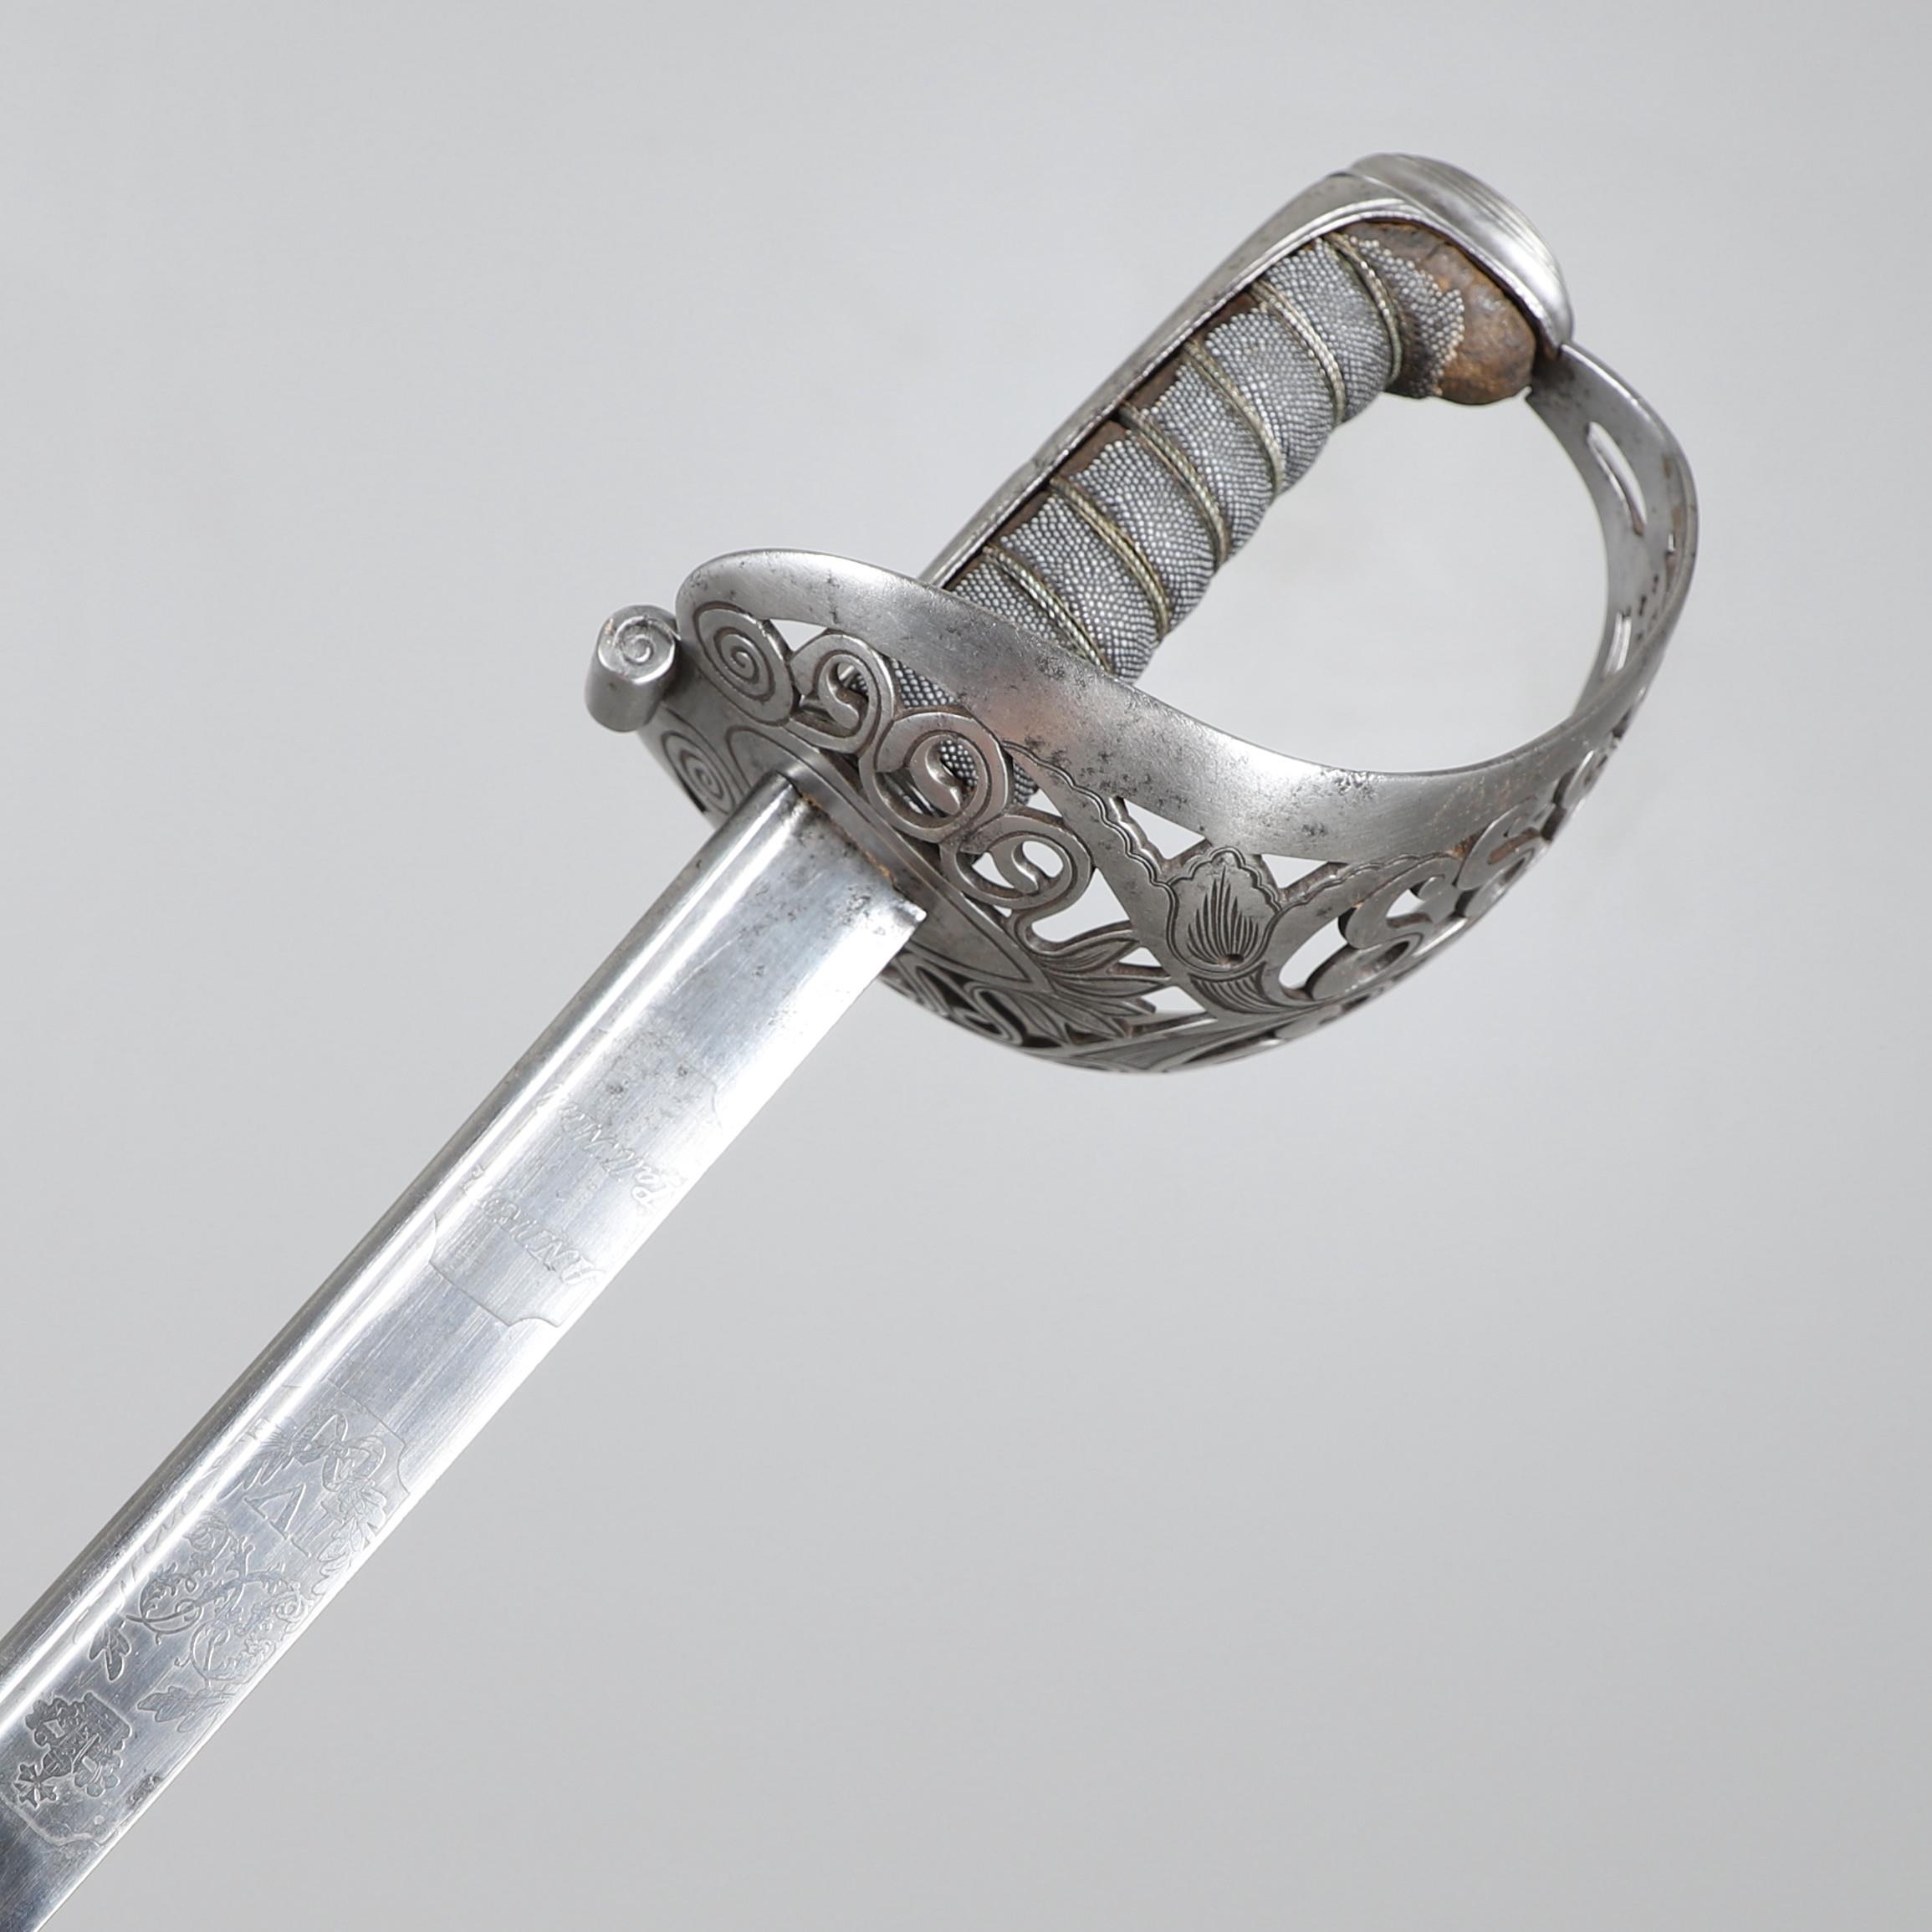 A GEORGE IV 1822 PATTERN HEAVY CAVALRY PATTERN SWORD BY ANDREWS OF PALL MALL. - Image 2 of 12